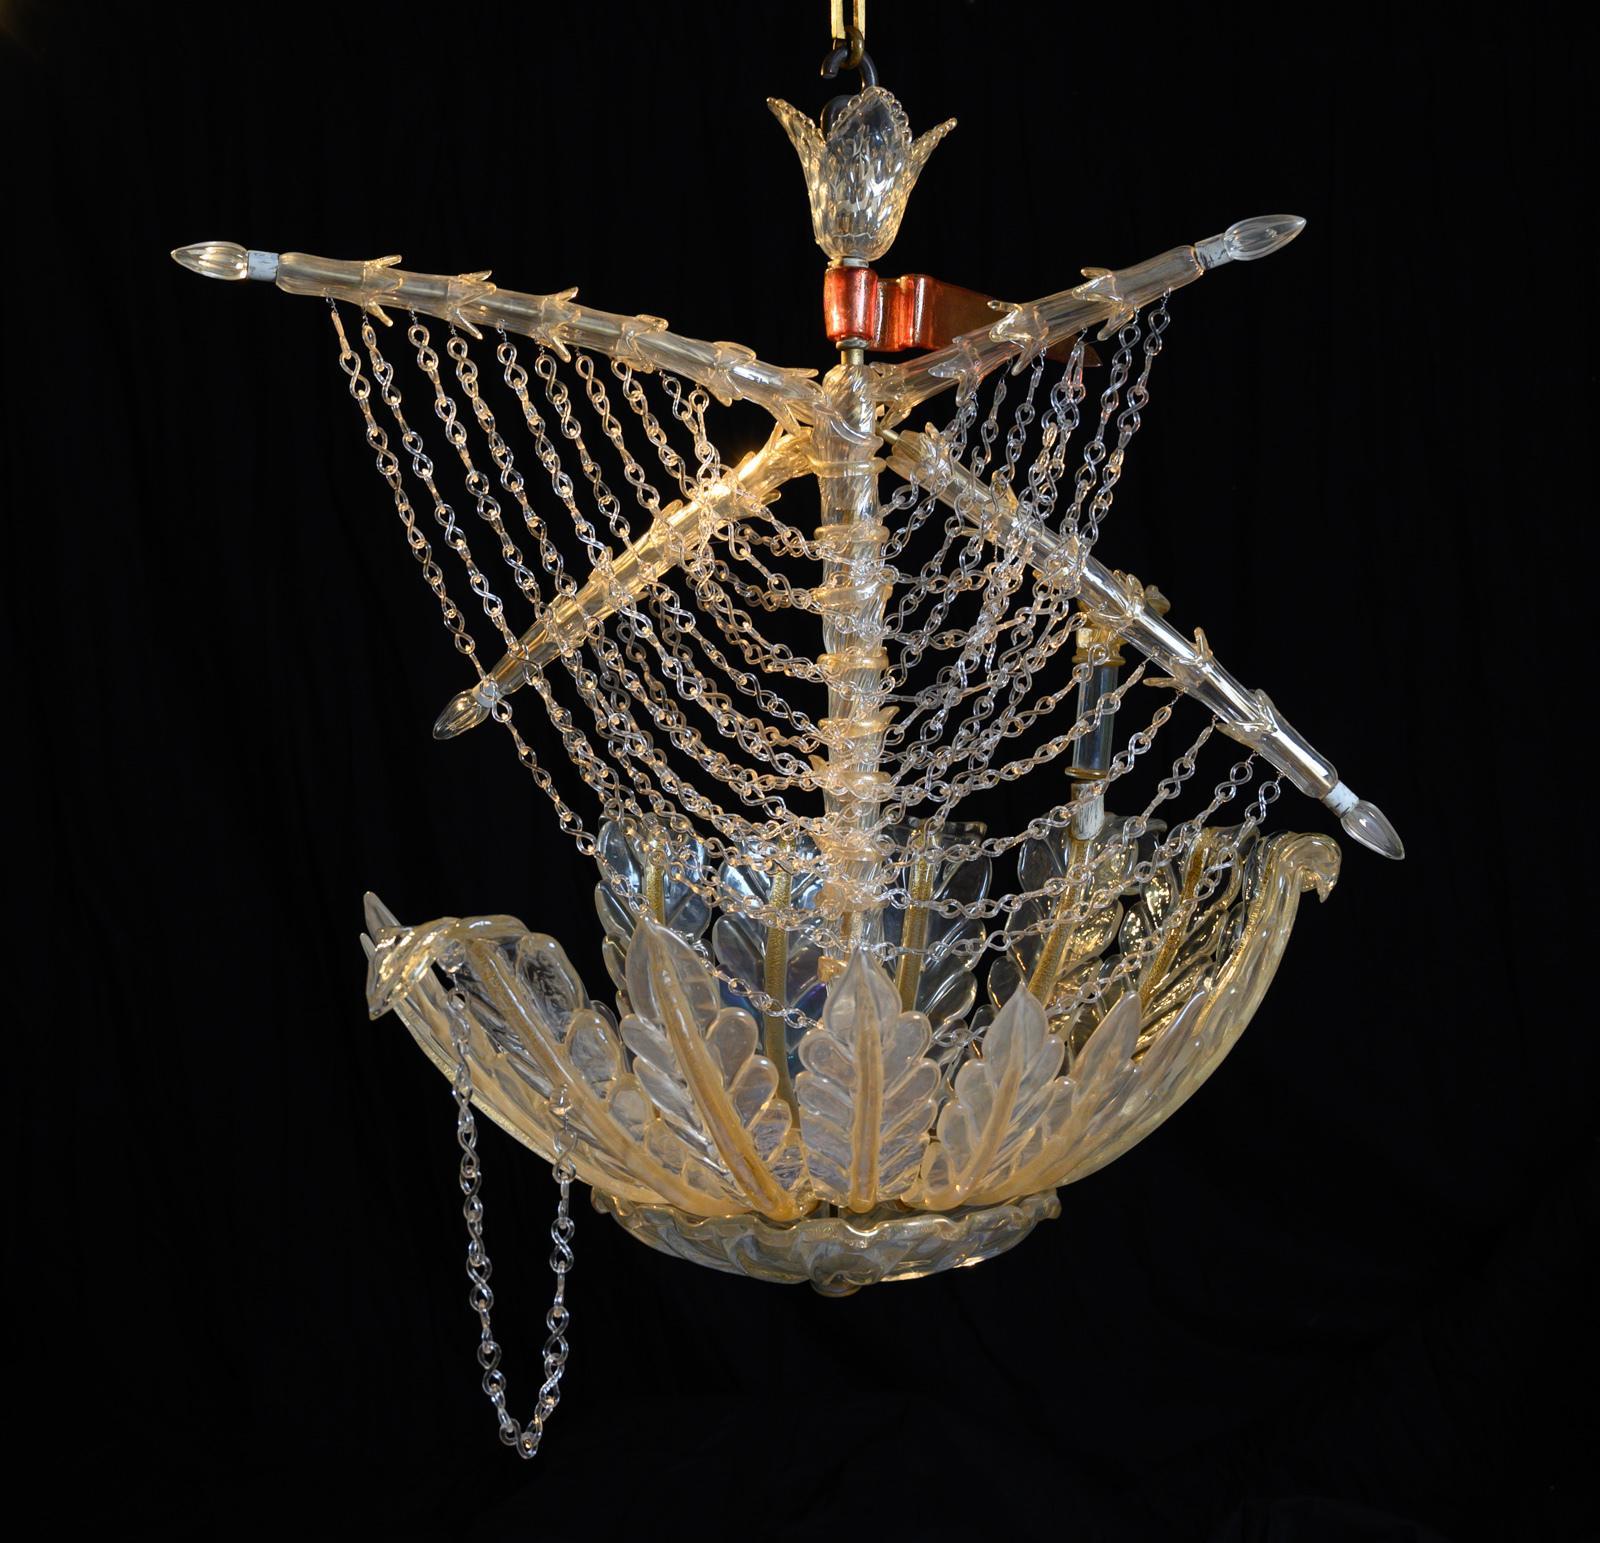 Extremely rare, signed and documented Murano galleon chandelier by Seguso, Vetri d’Arte, Venice.
This unique fantasy hanging light, supplied by Veronese Paris in the 1950s was designed and hand crafted by Angello Seguso, expertly made in iridescent